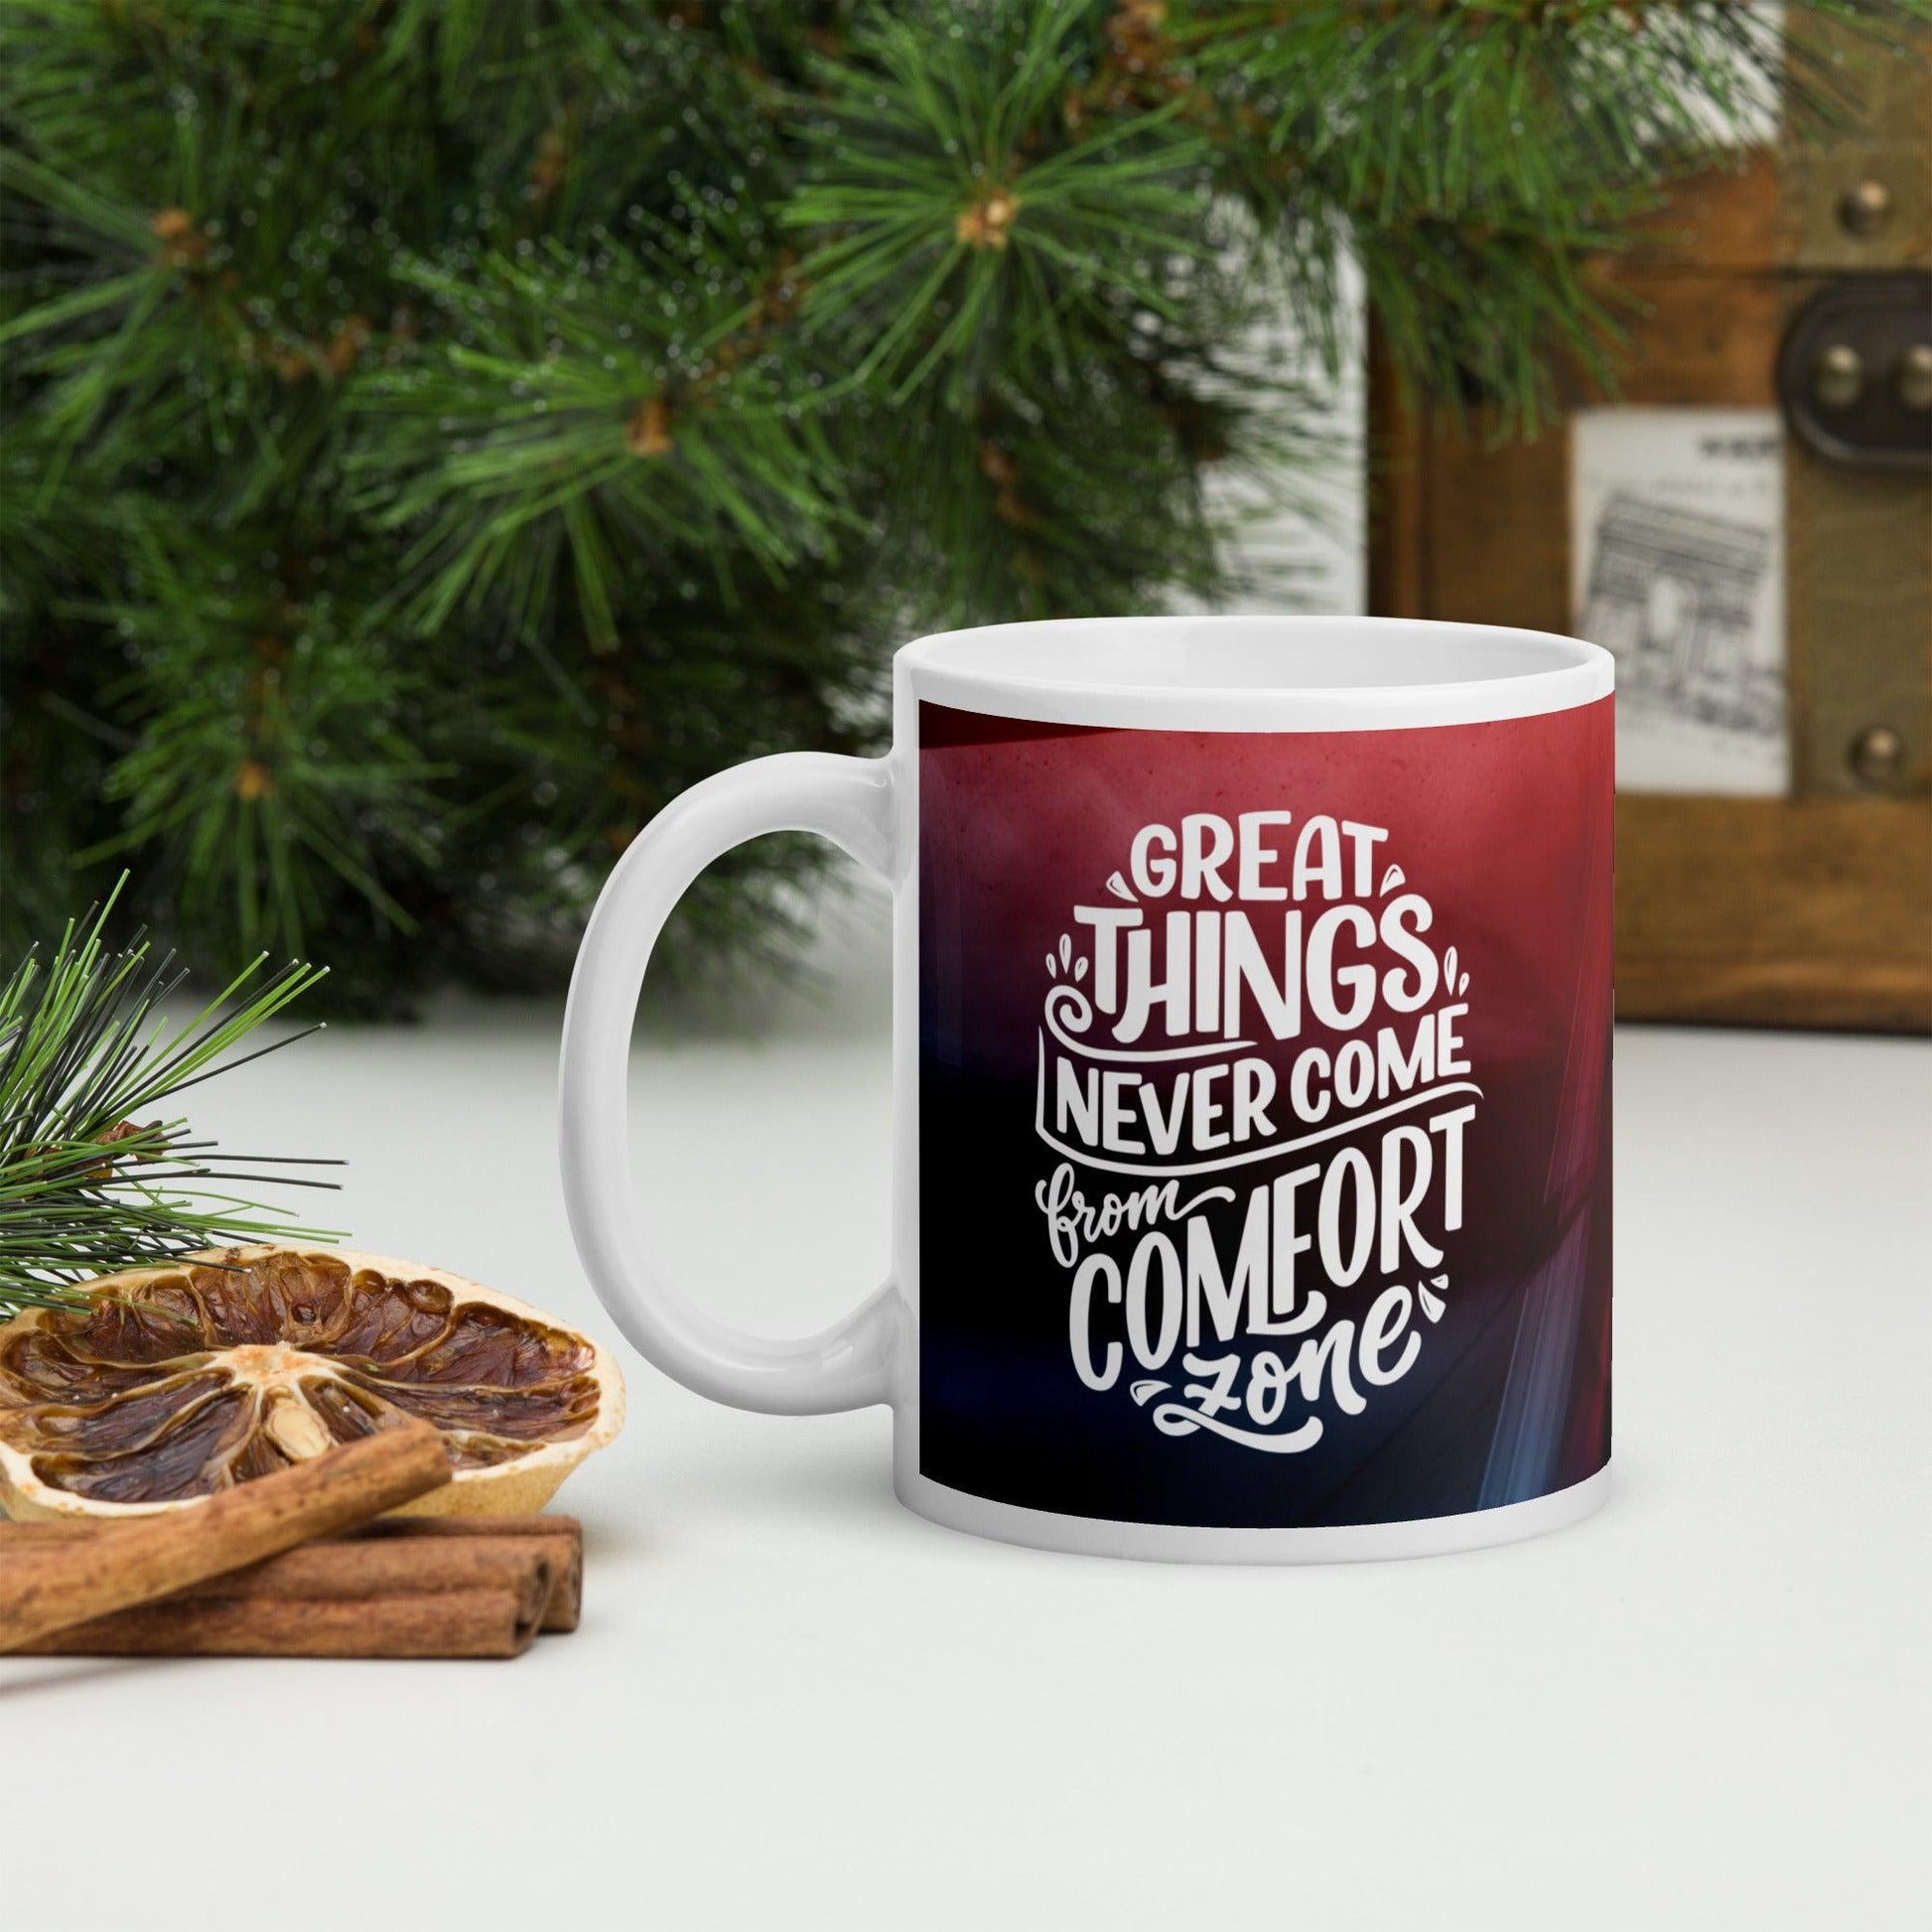 Great Things Never Come From Comfort Zone | White glossy mug - Affirm Effect